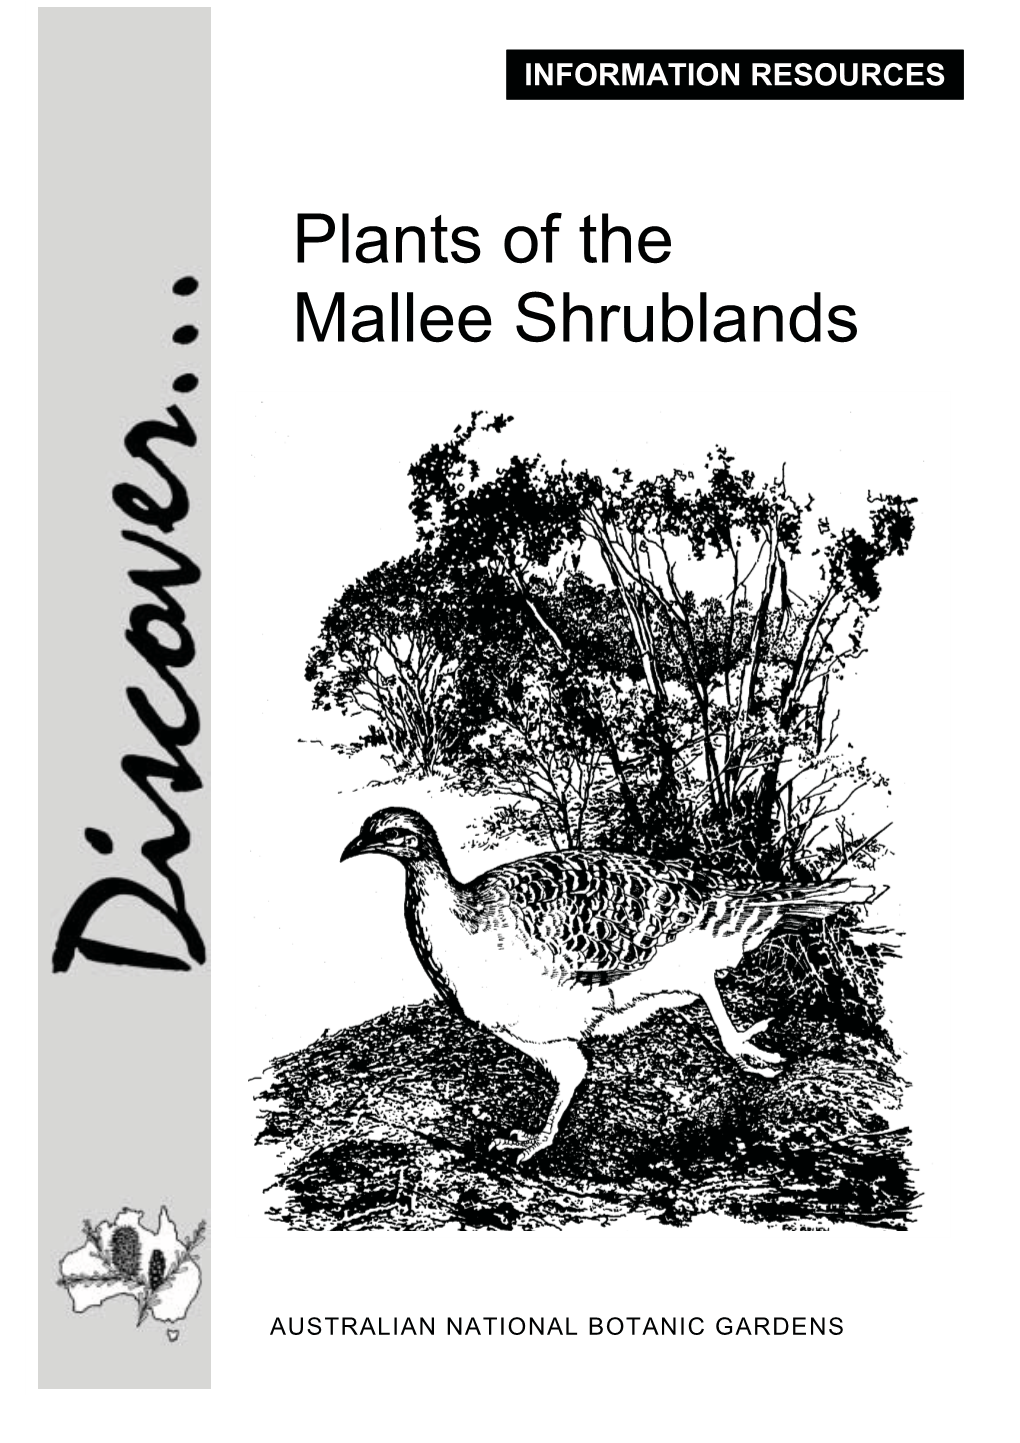 Plants of the Mallee Shrublands